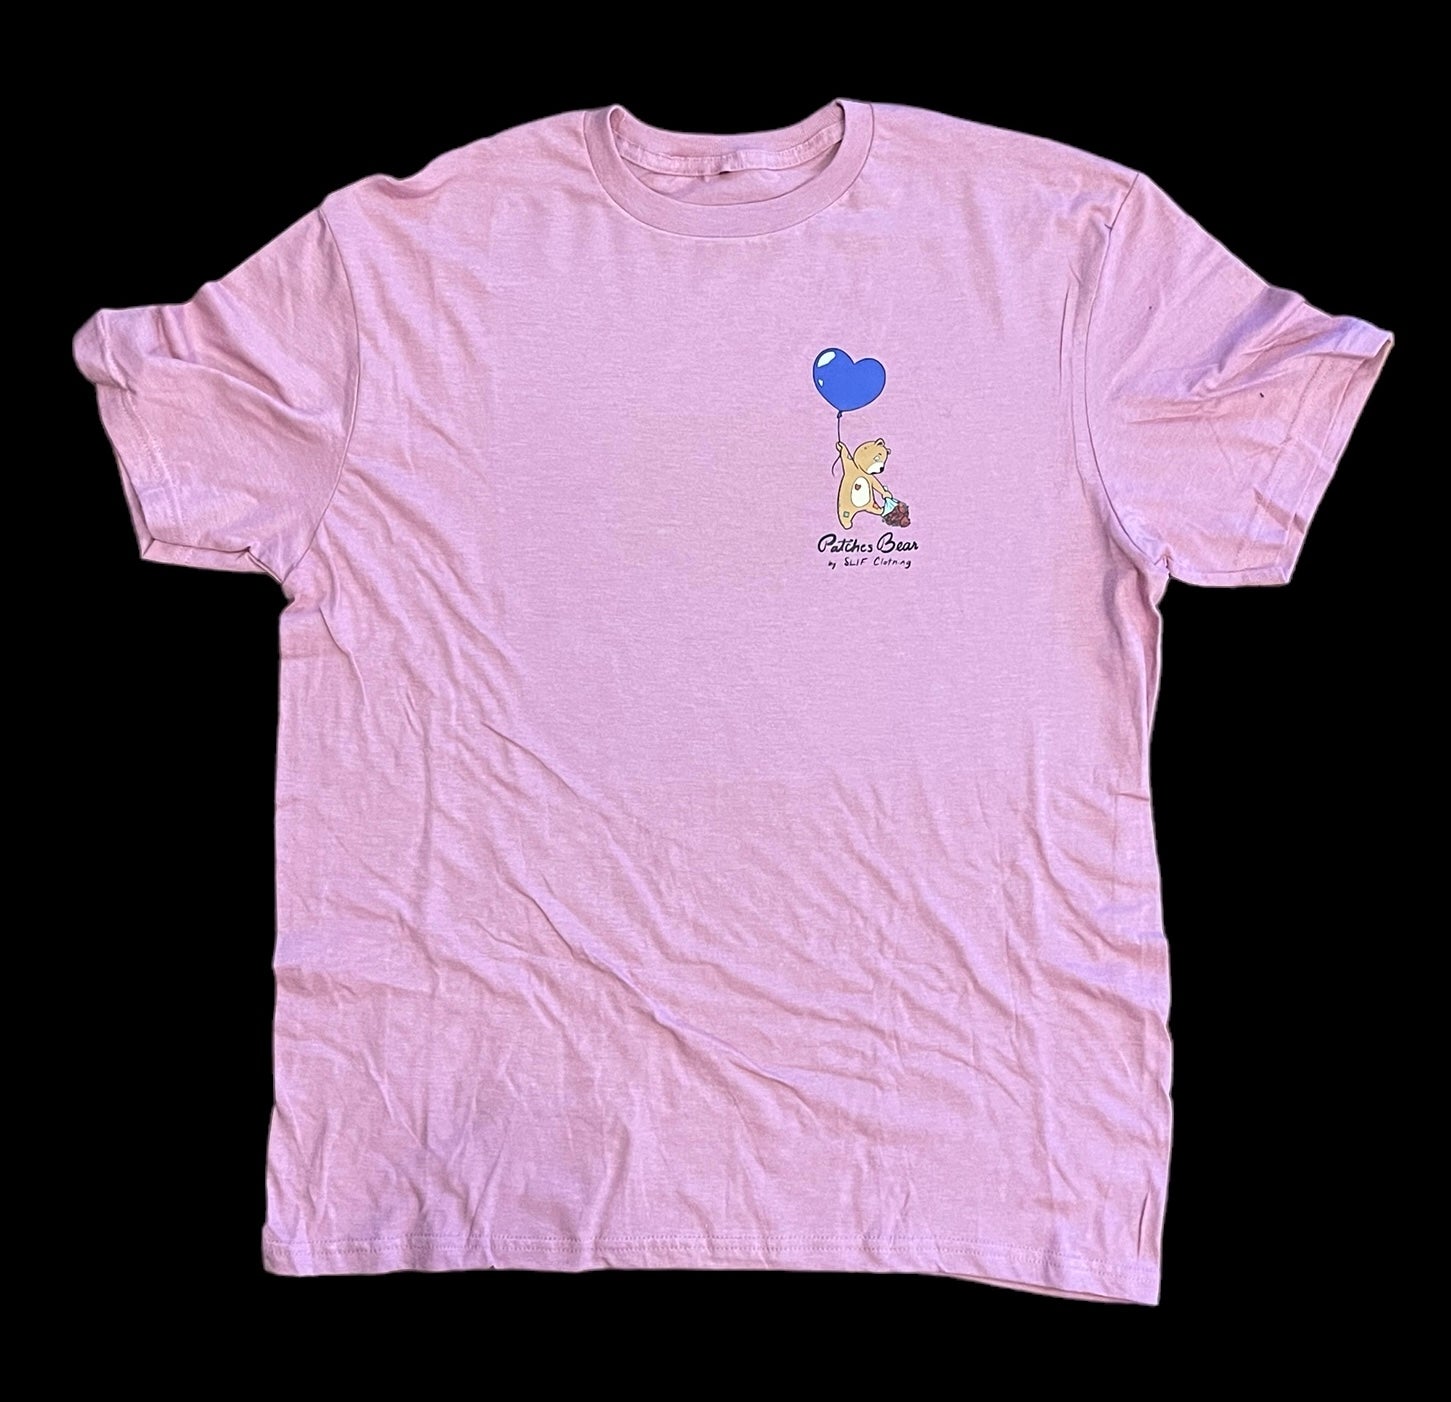 SLIF x PATCHES pocket tee (pink)